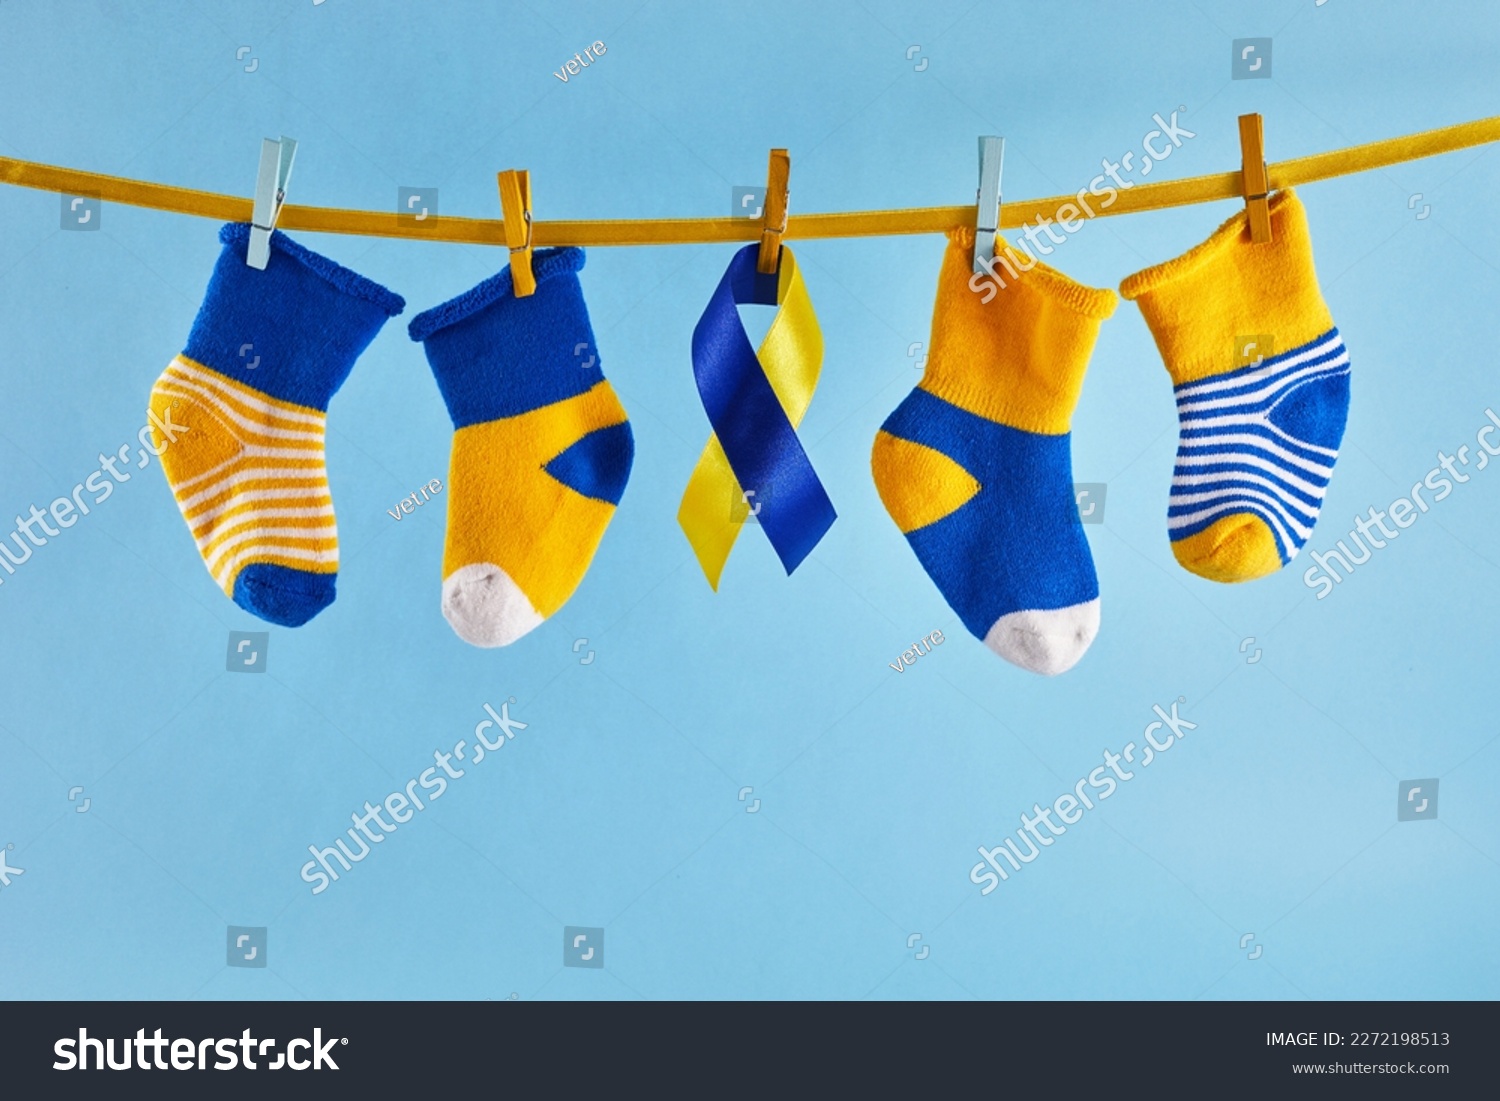 World Down syndrome day background. Lots of socks. #2272198513